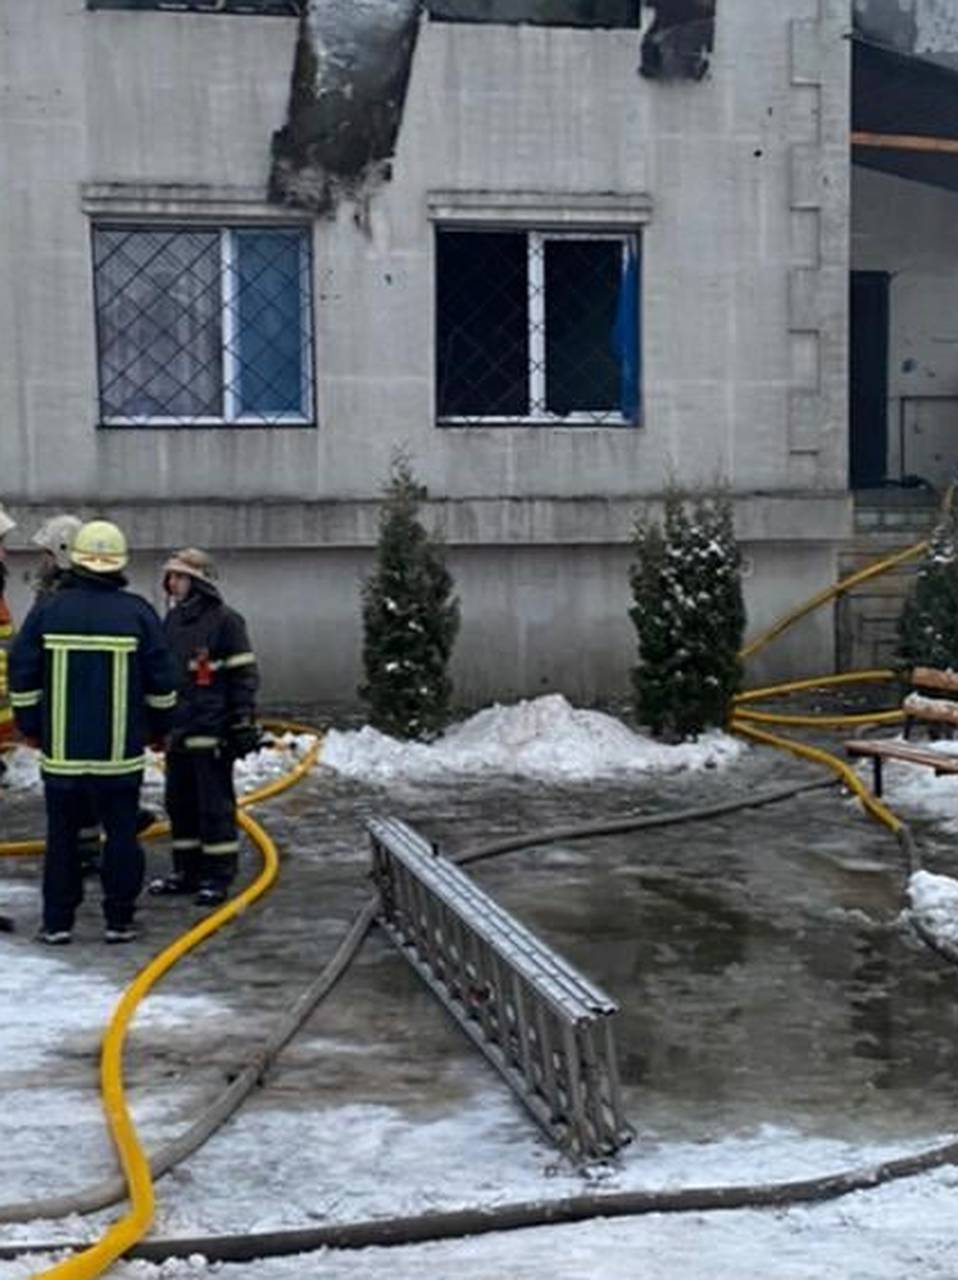 Rescuers work at the scene of the accident following a fire in nursing home in Kharkiv